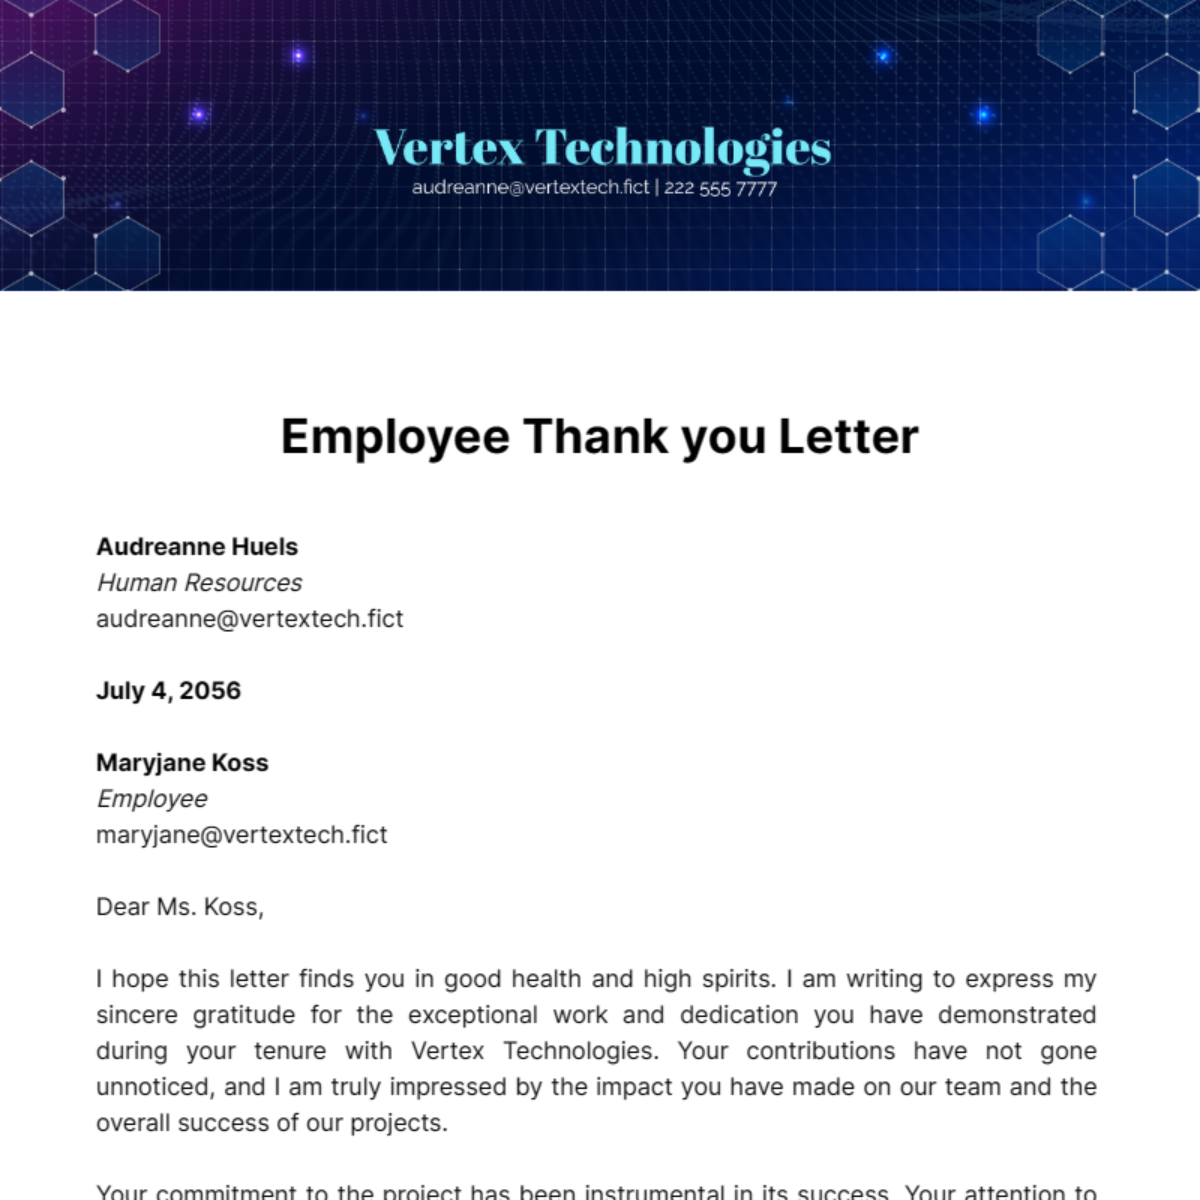 Employee Thank you Letter Template